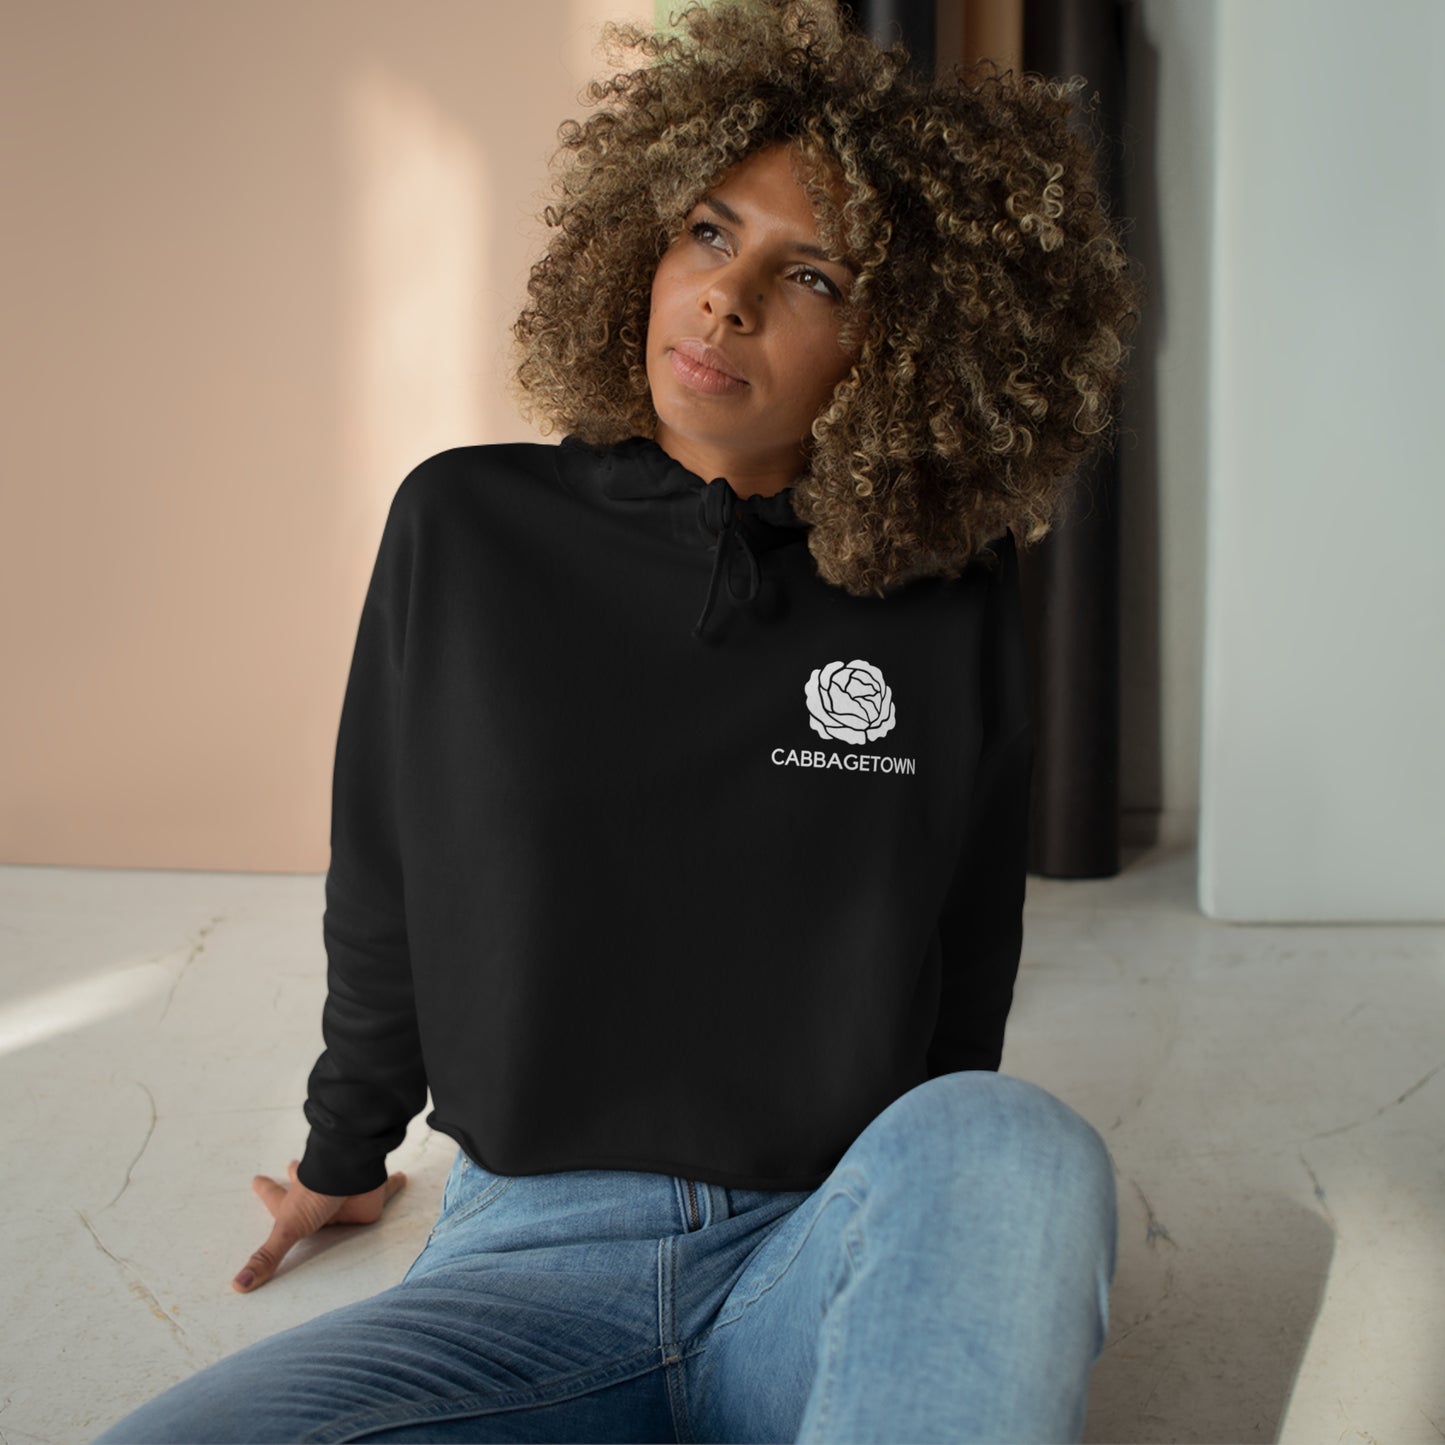 Crop Hoodie with Monochrome Cabbagetown and Super Bargain Logo